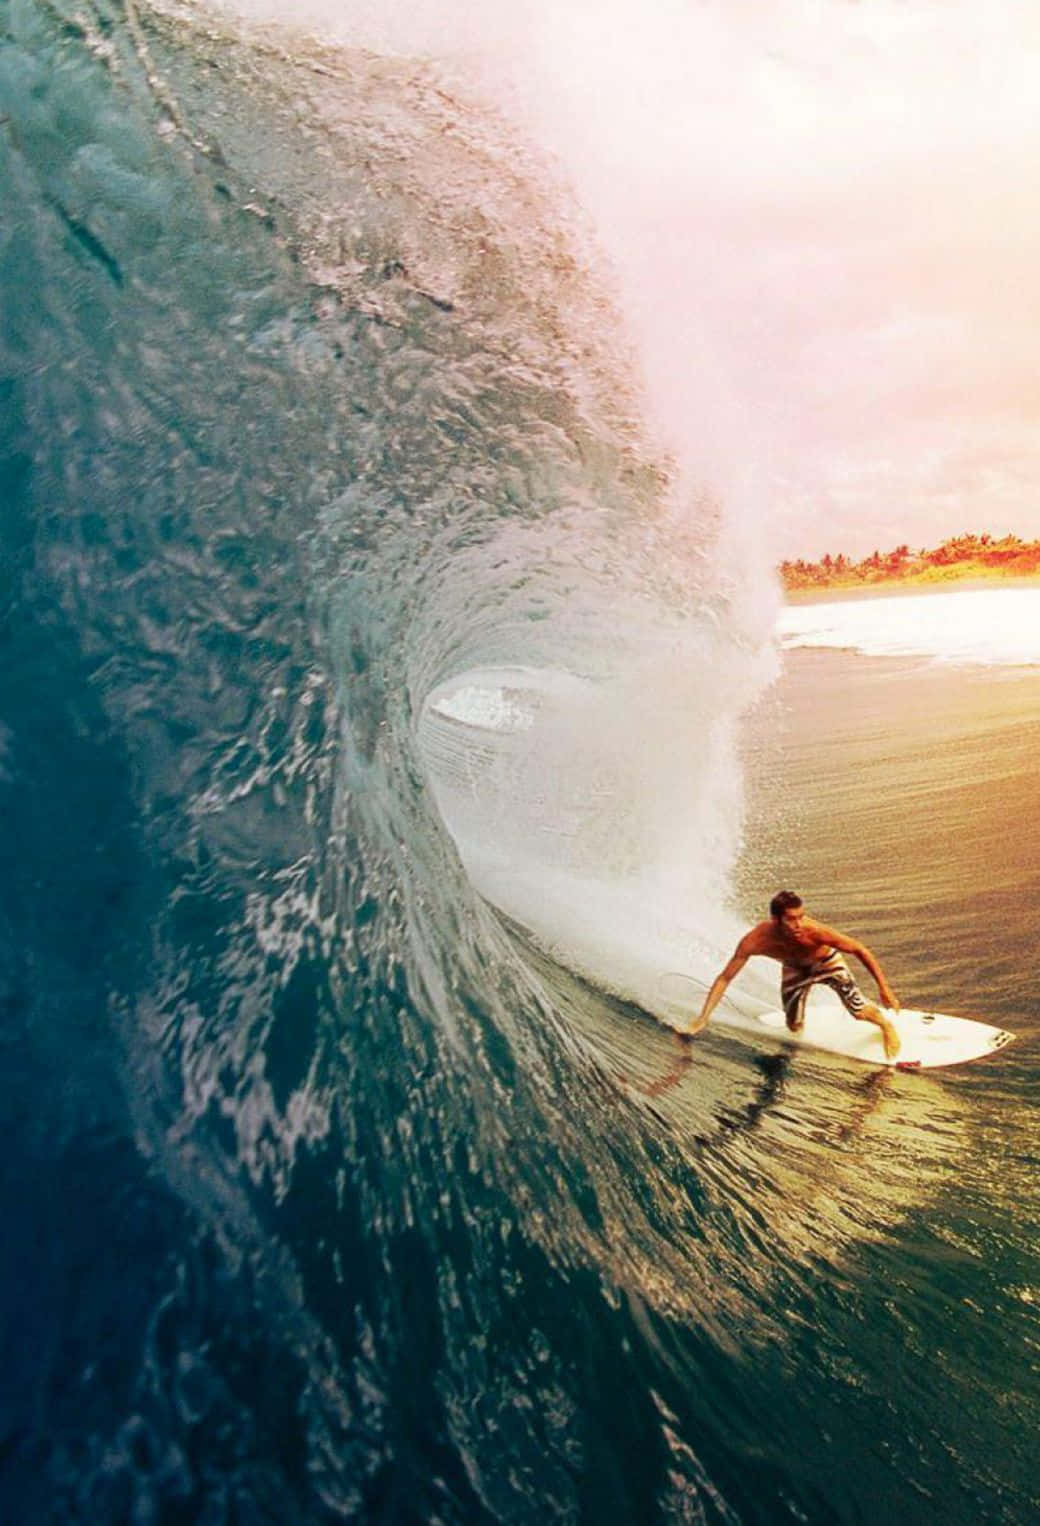 "Make the most of your iPhone and the best surfing spots!" Wallpaper